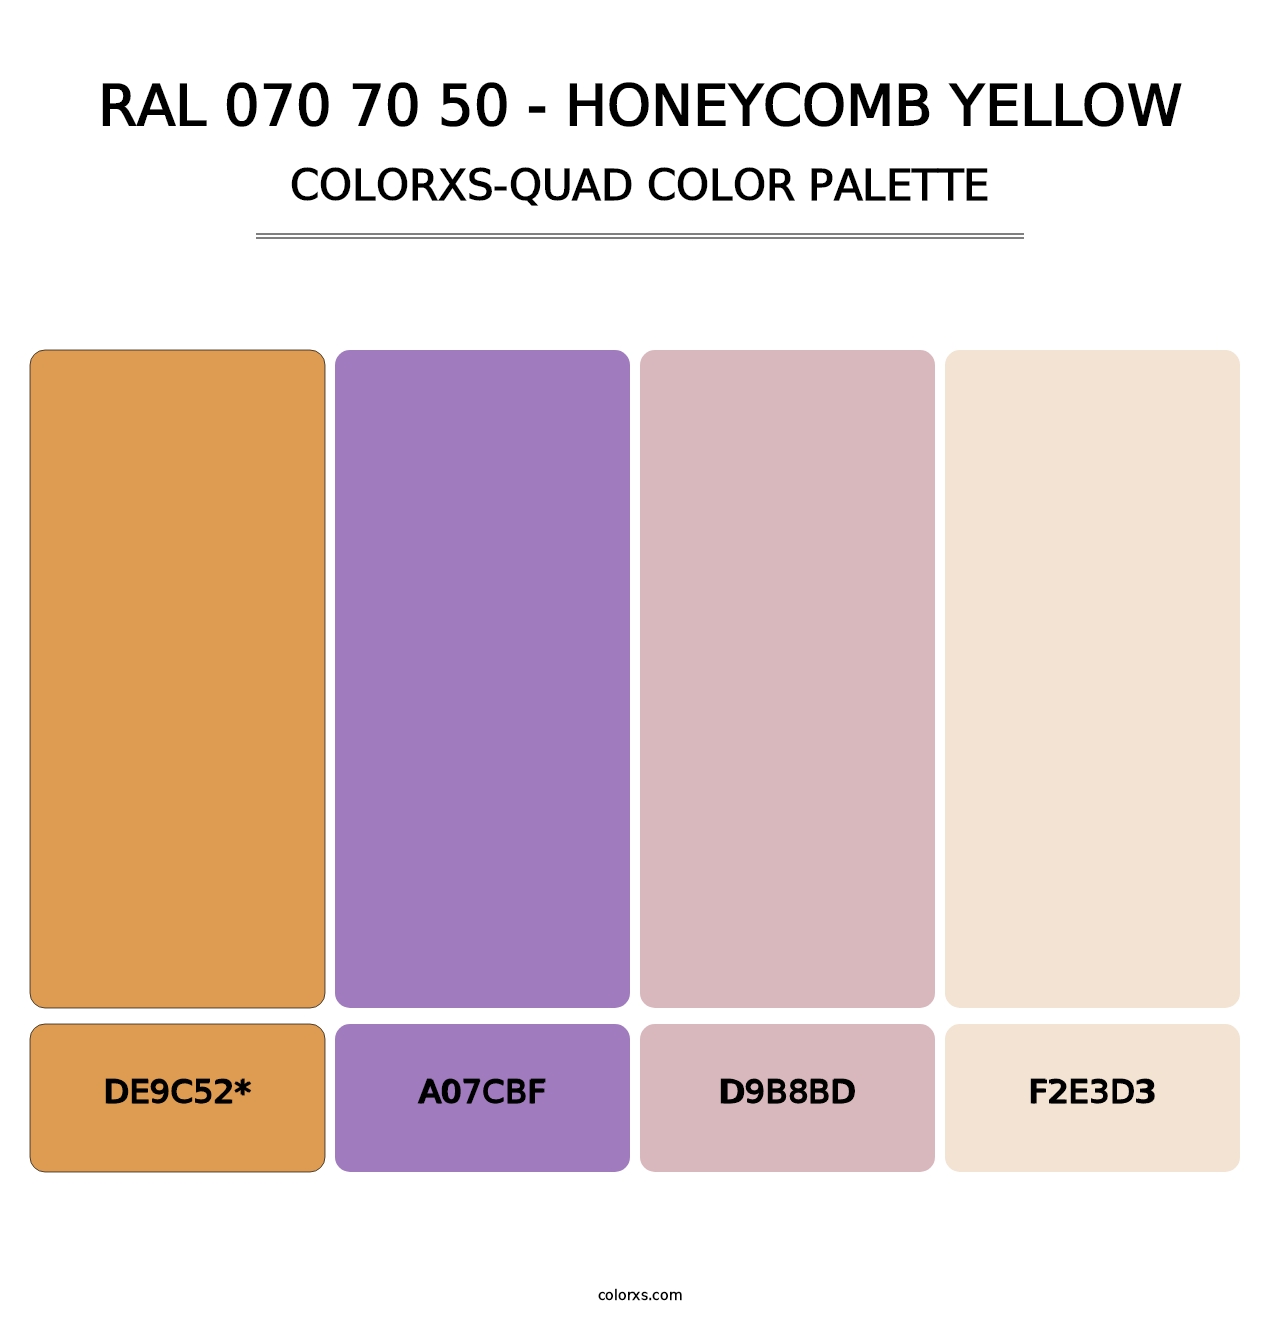 RAL 070 70 50 - Honeycomb Yellow - Colorxs Quad Palette